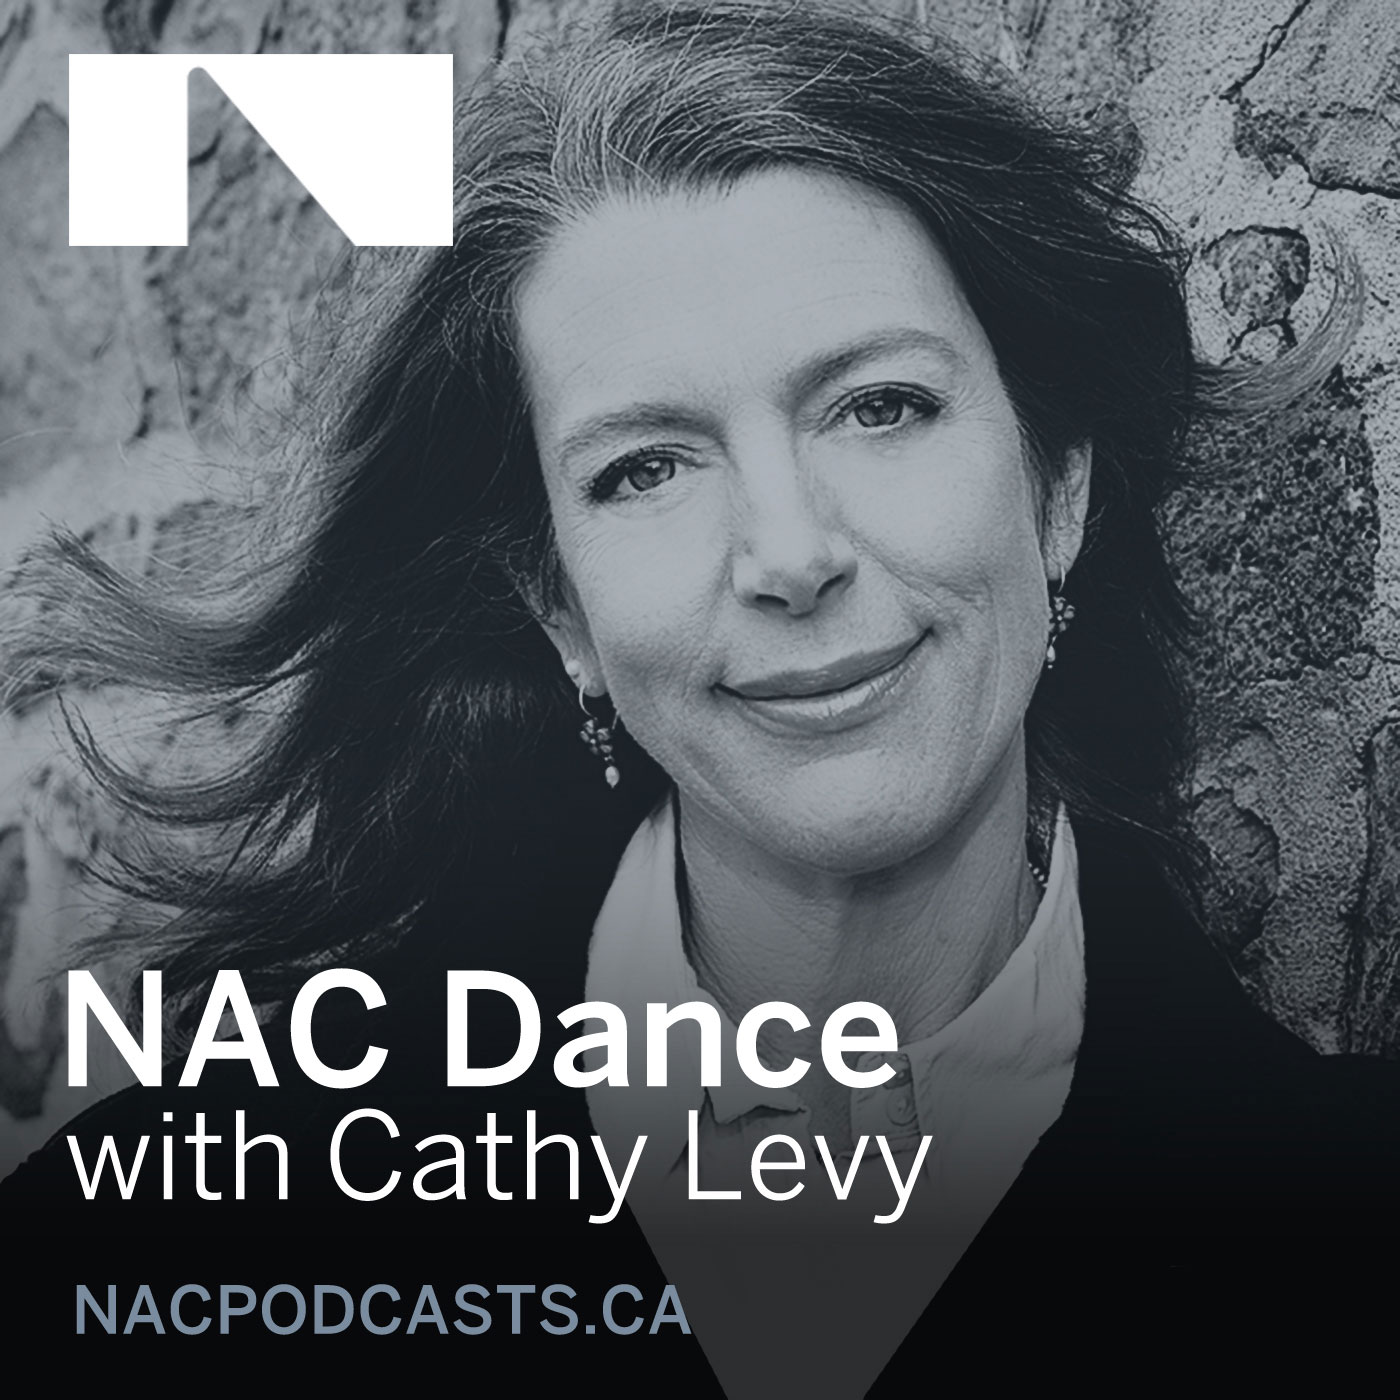 NAC Dance with Cathy Levy